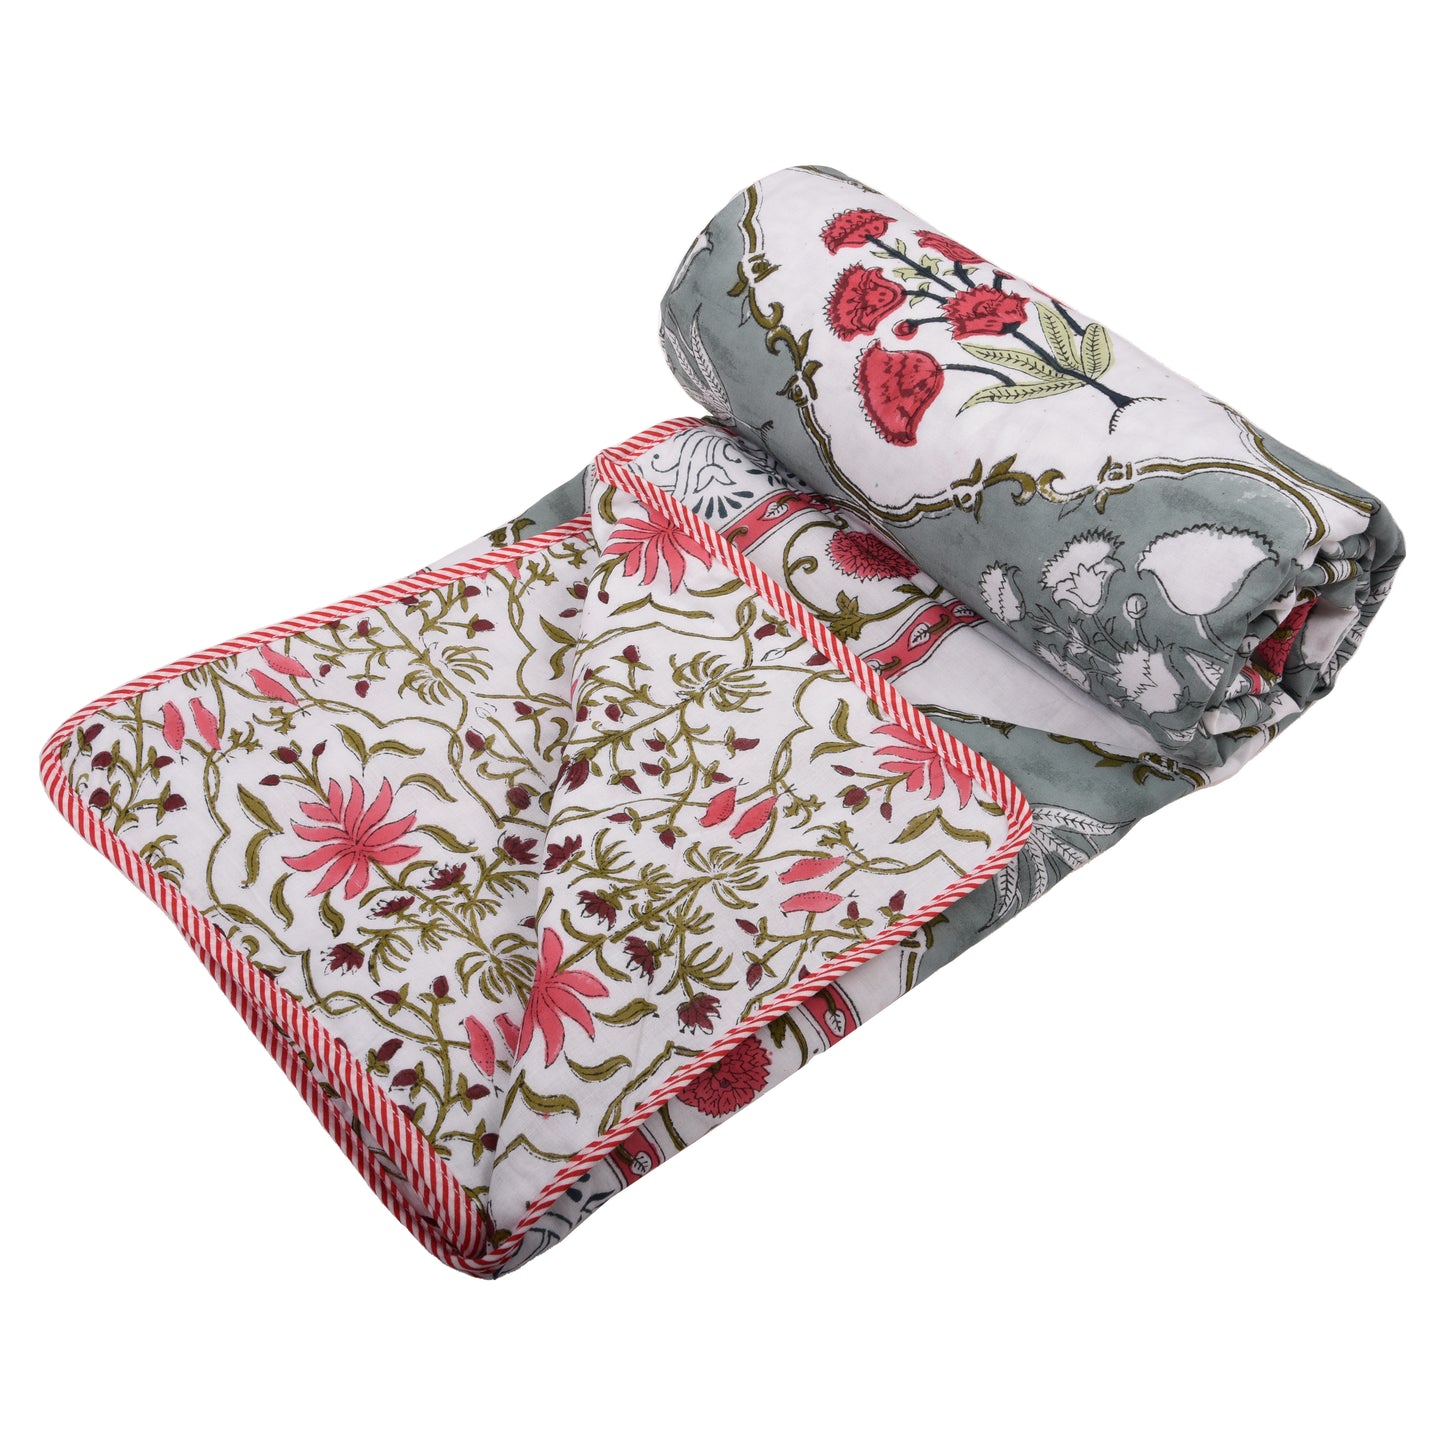 Cotton Blanket - Single Dohar ( 60 x 90 Inches) Grey Red Floral